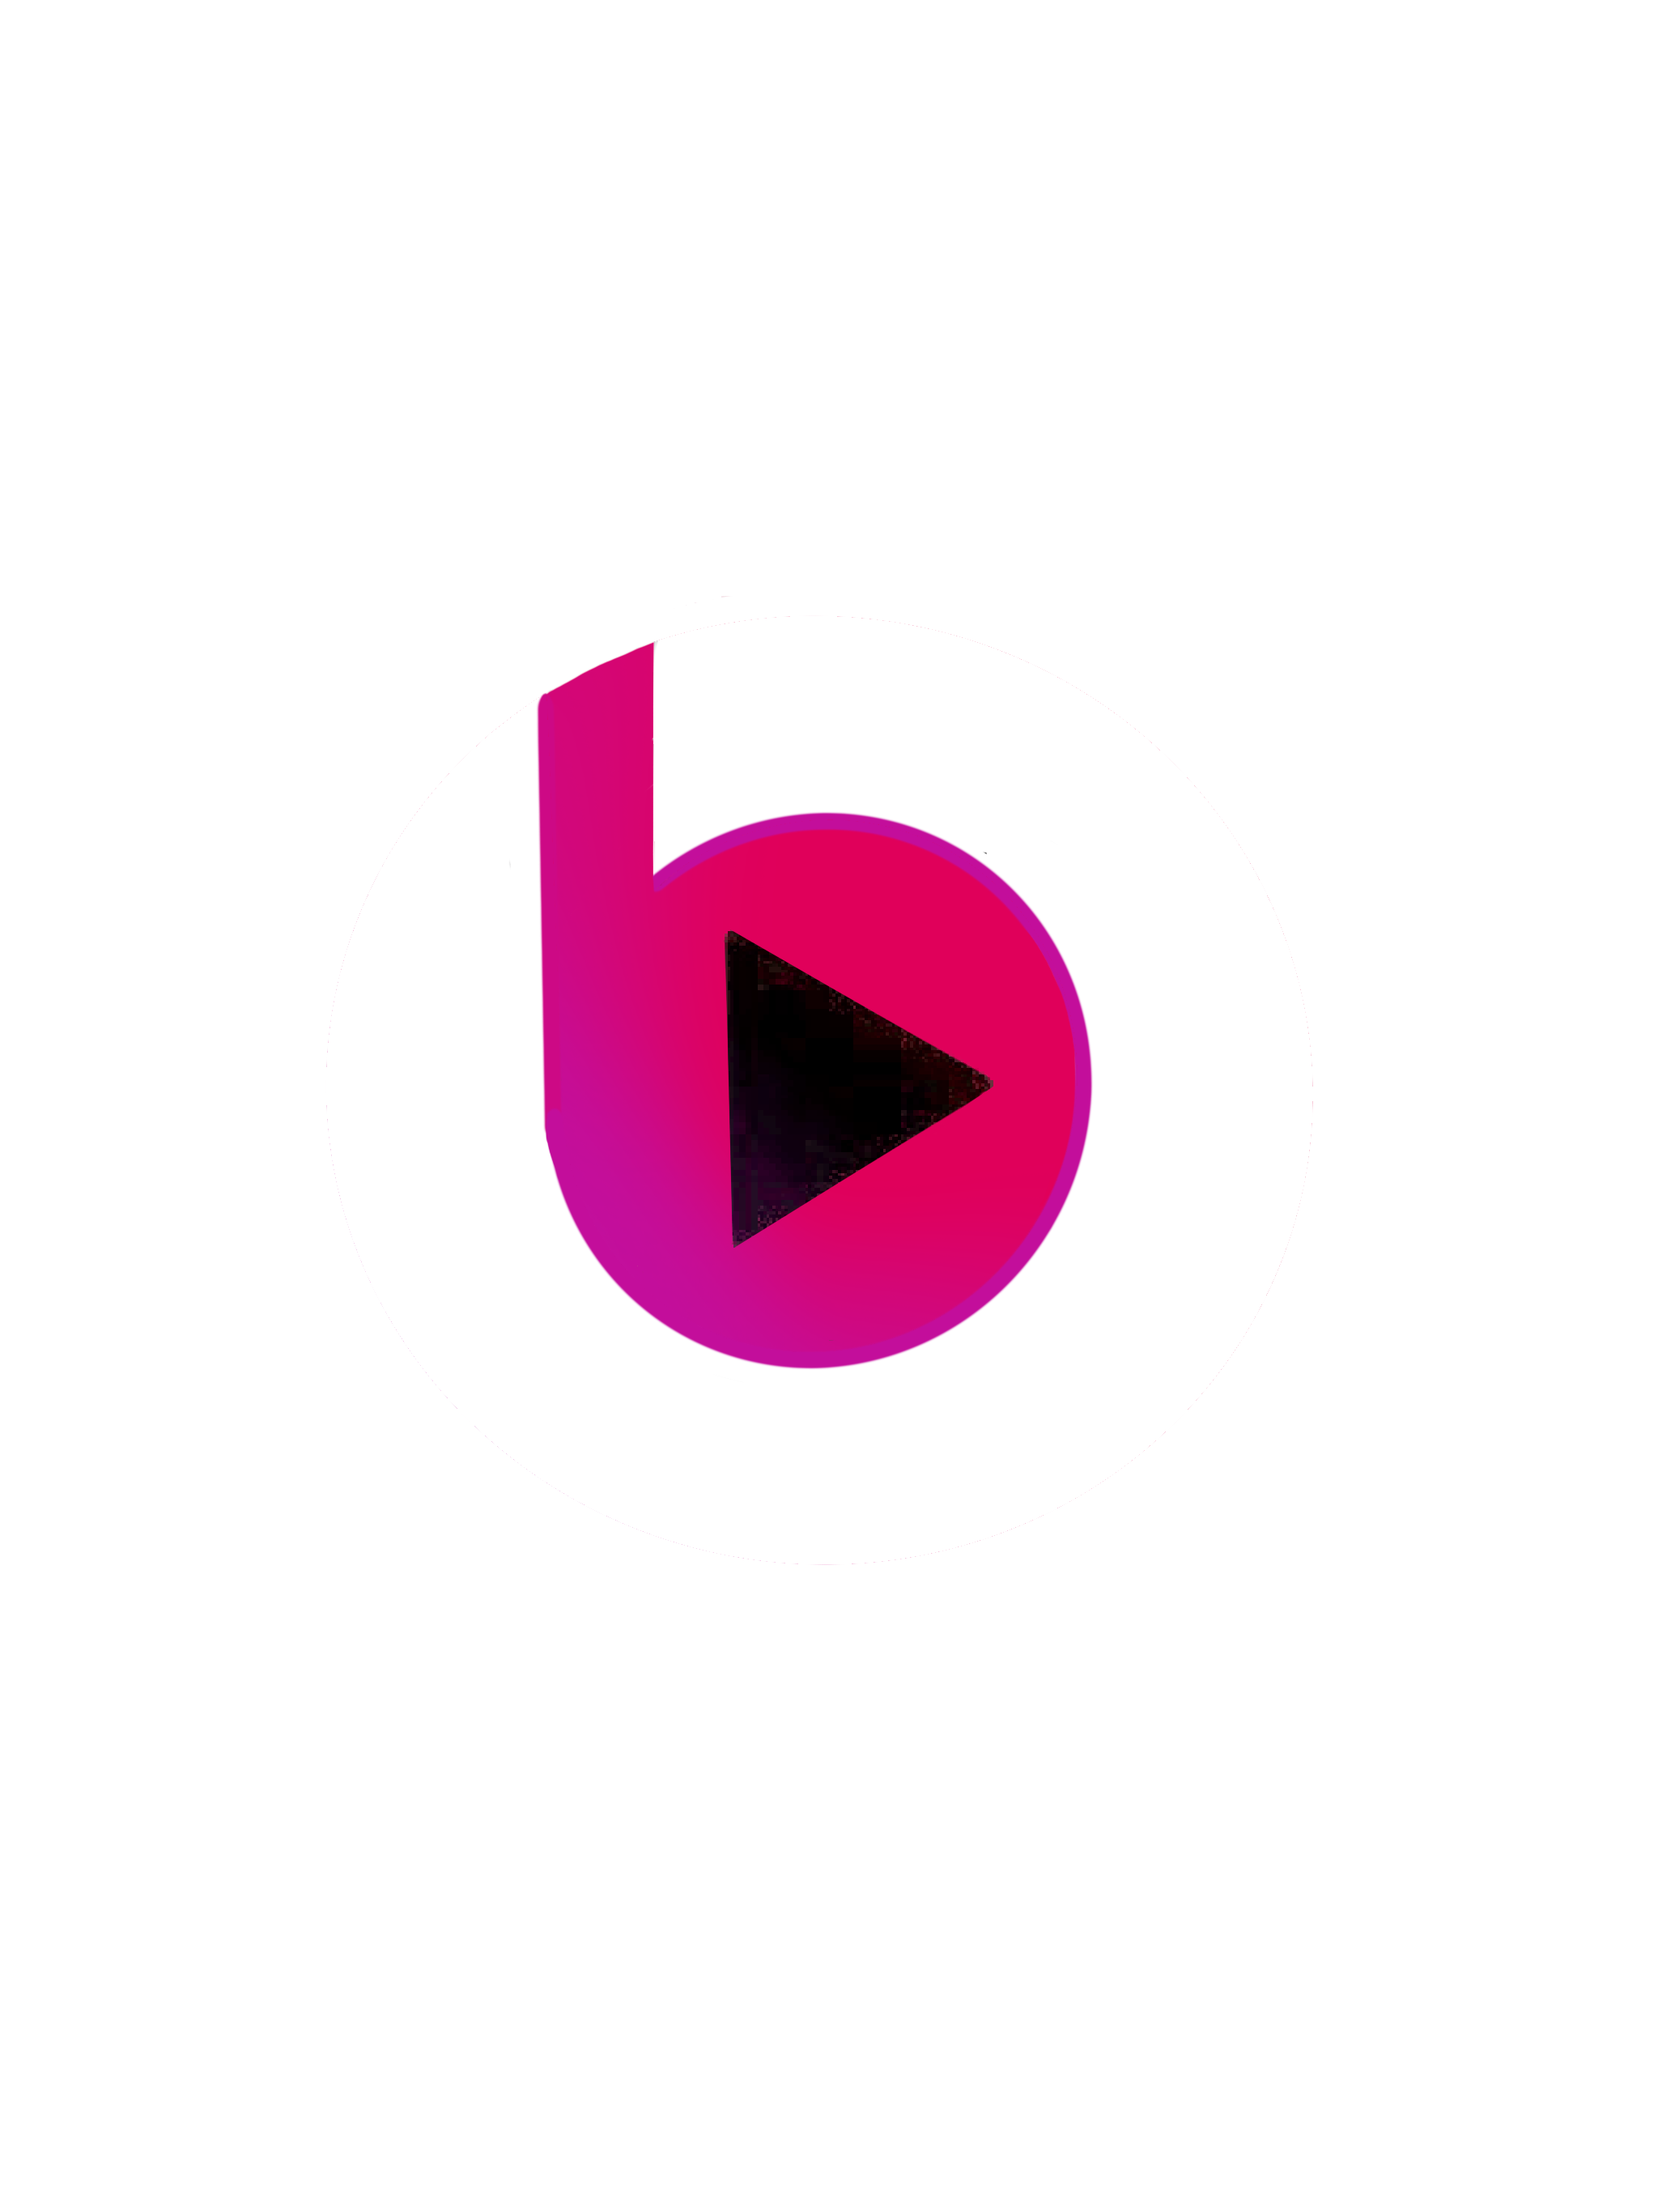 BeatzBakers & Tapes UK collaborate with event to give music producers massive boost